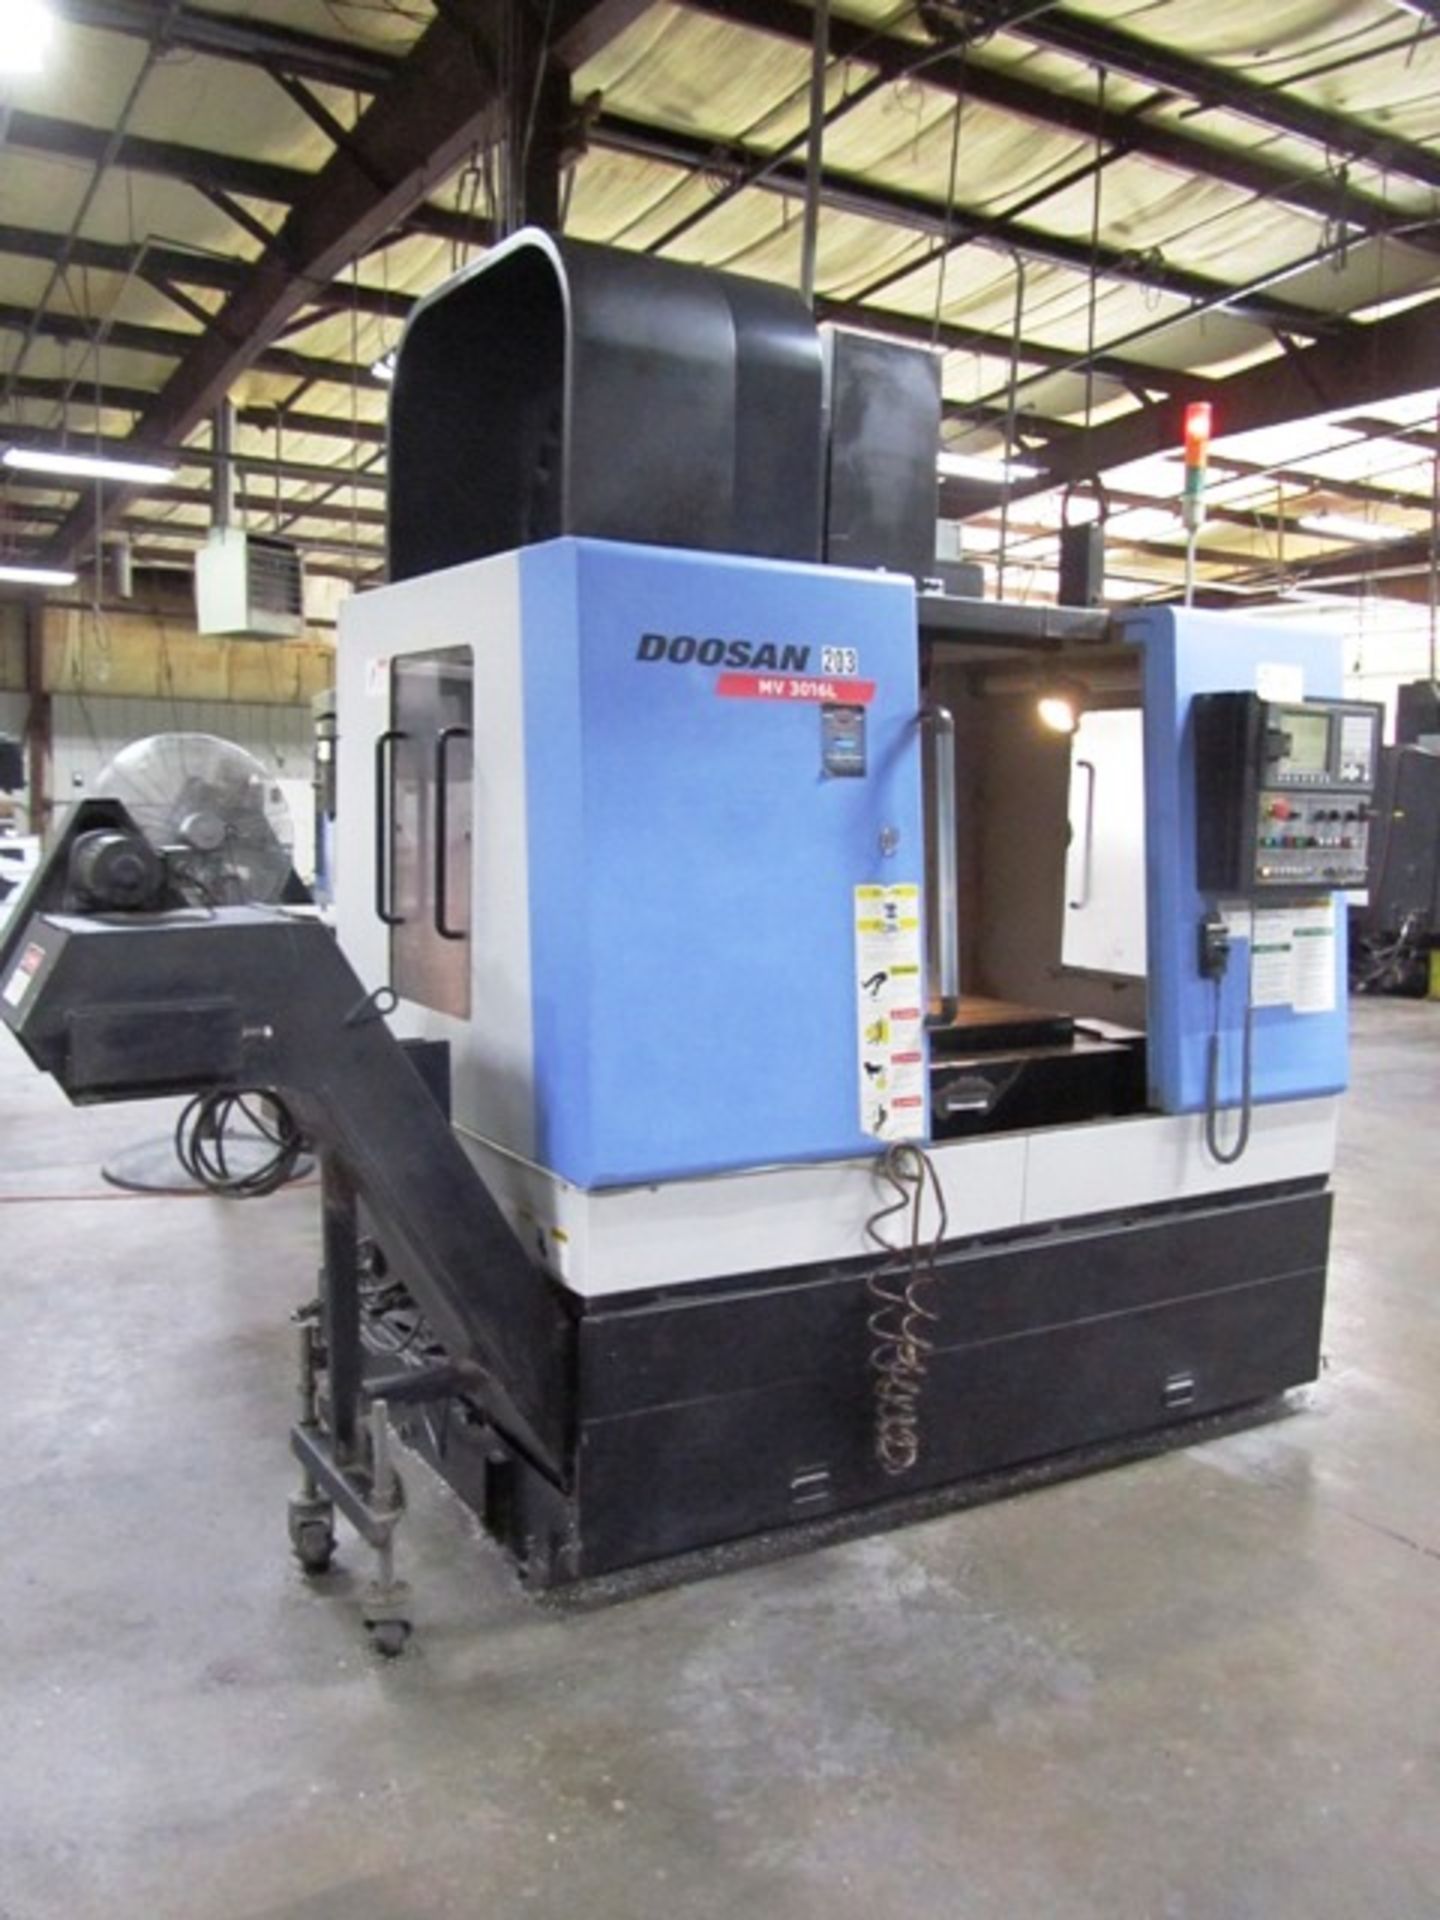 Doosan MV 3016L CNC Vertical Machining Center with 37'' x 17'' Worktable, #40 Taper Spindle Speeds - Image 4 of 5